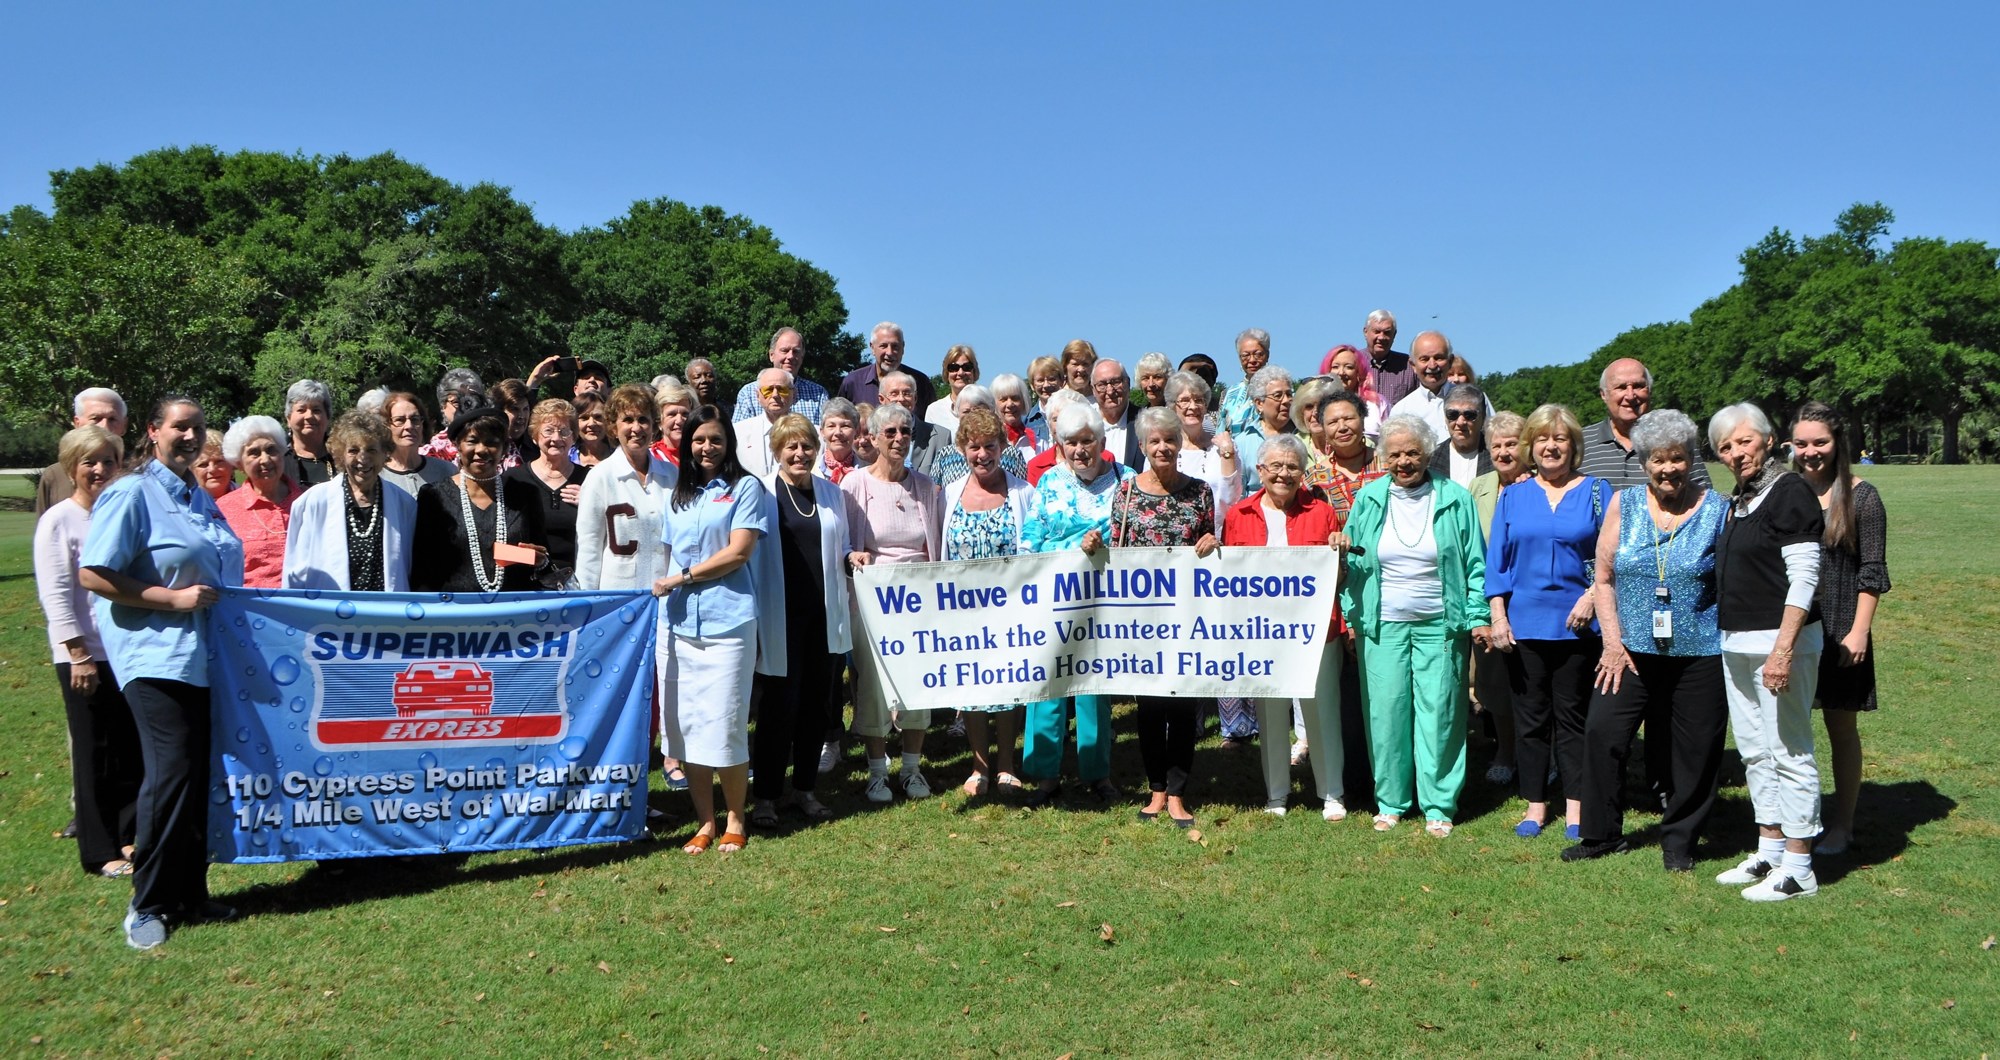 In honor of National Volunteer Week, Florida Hospital Flagler hosted a volunteer appreciation luncheon at the Halifax Plantation Golf Club in Ormond Beach on April 18 for more than 120 volunteers. Photo courtesy of Lindsay Cashio